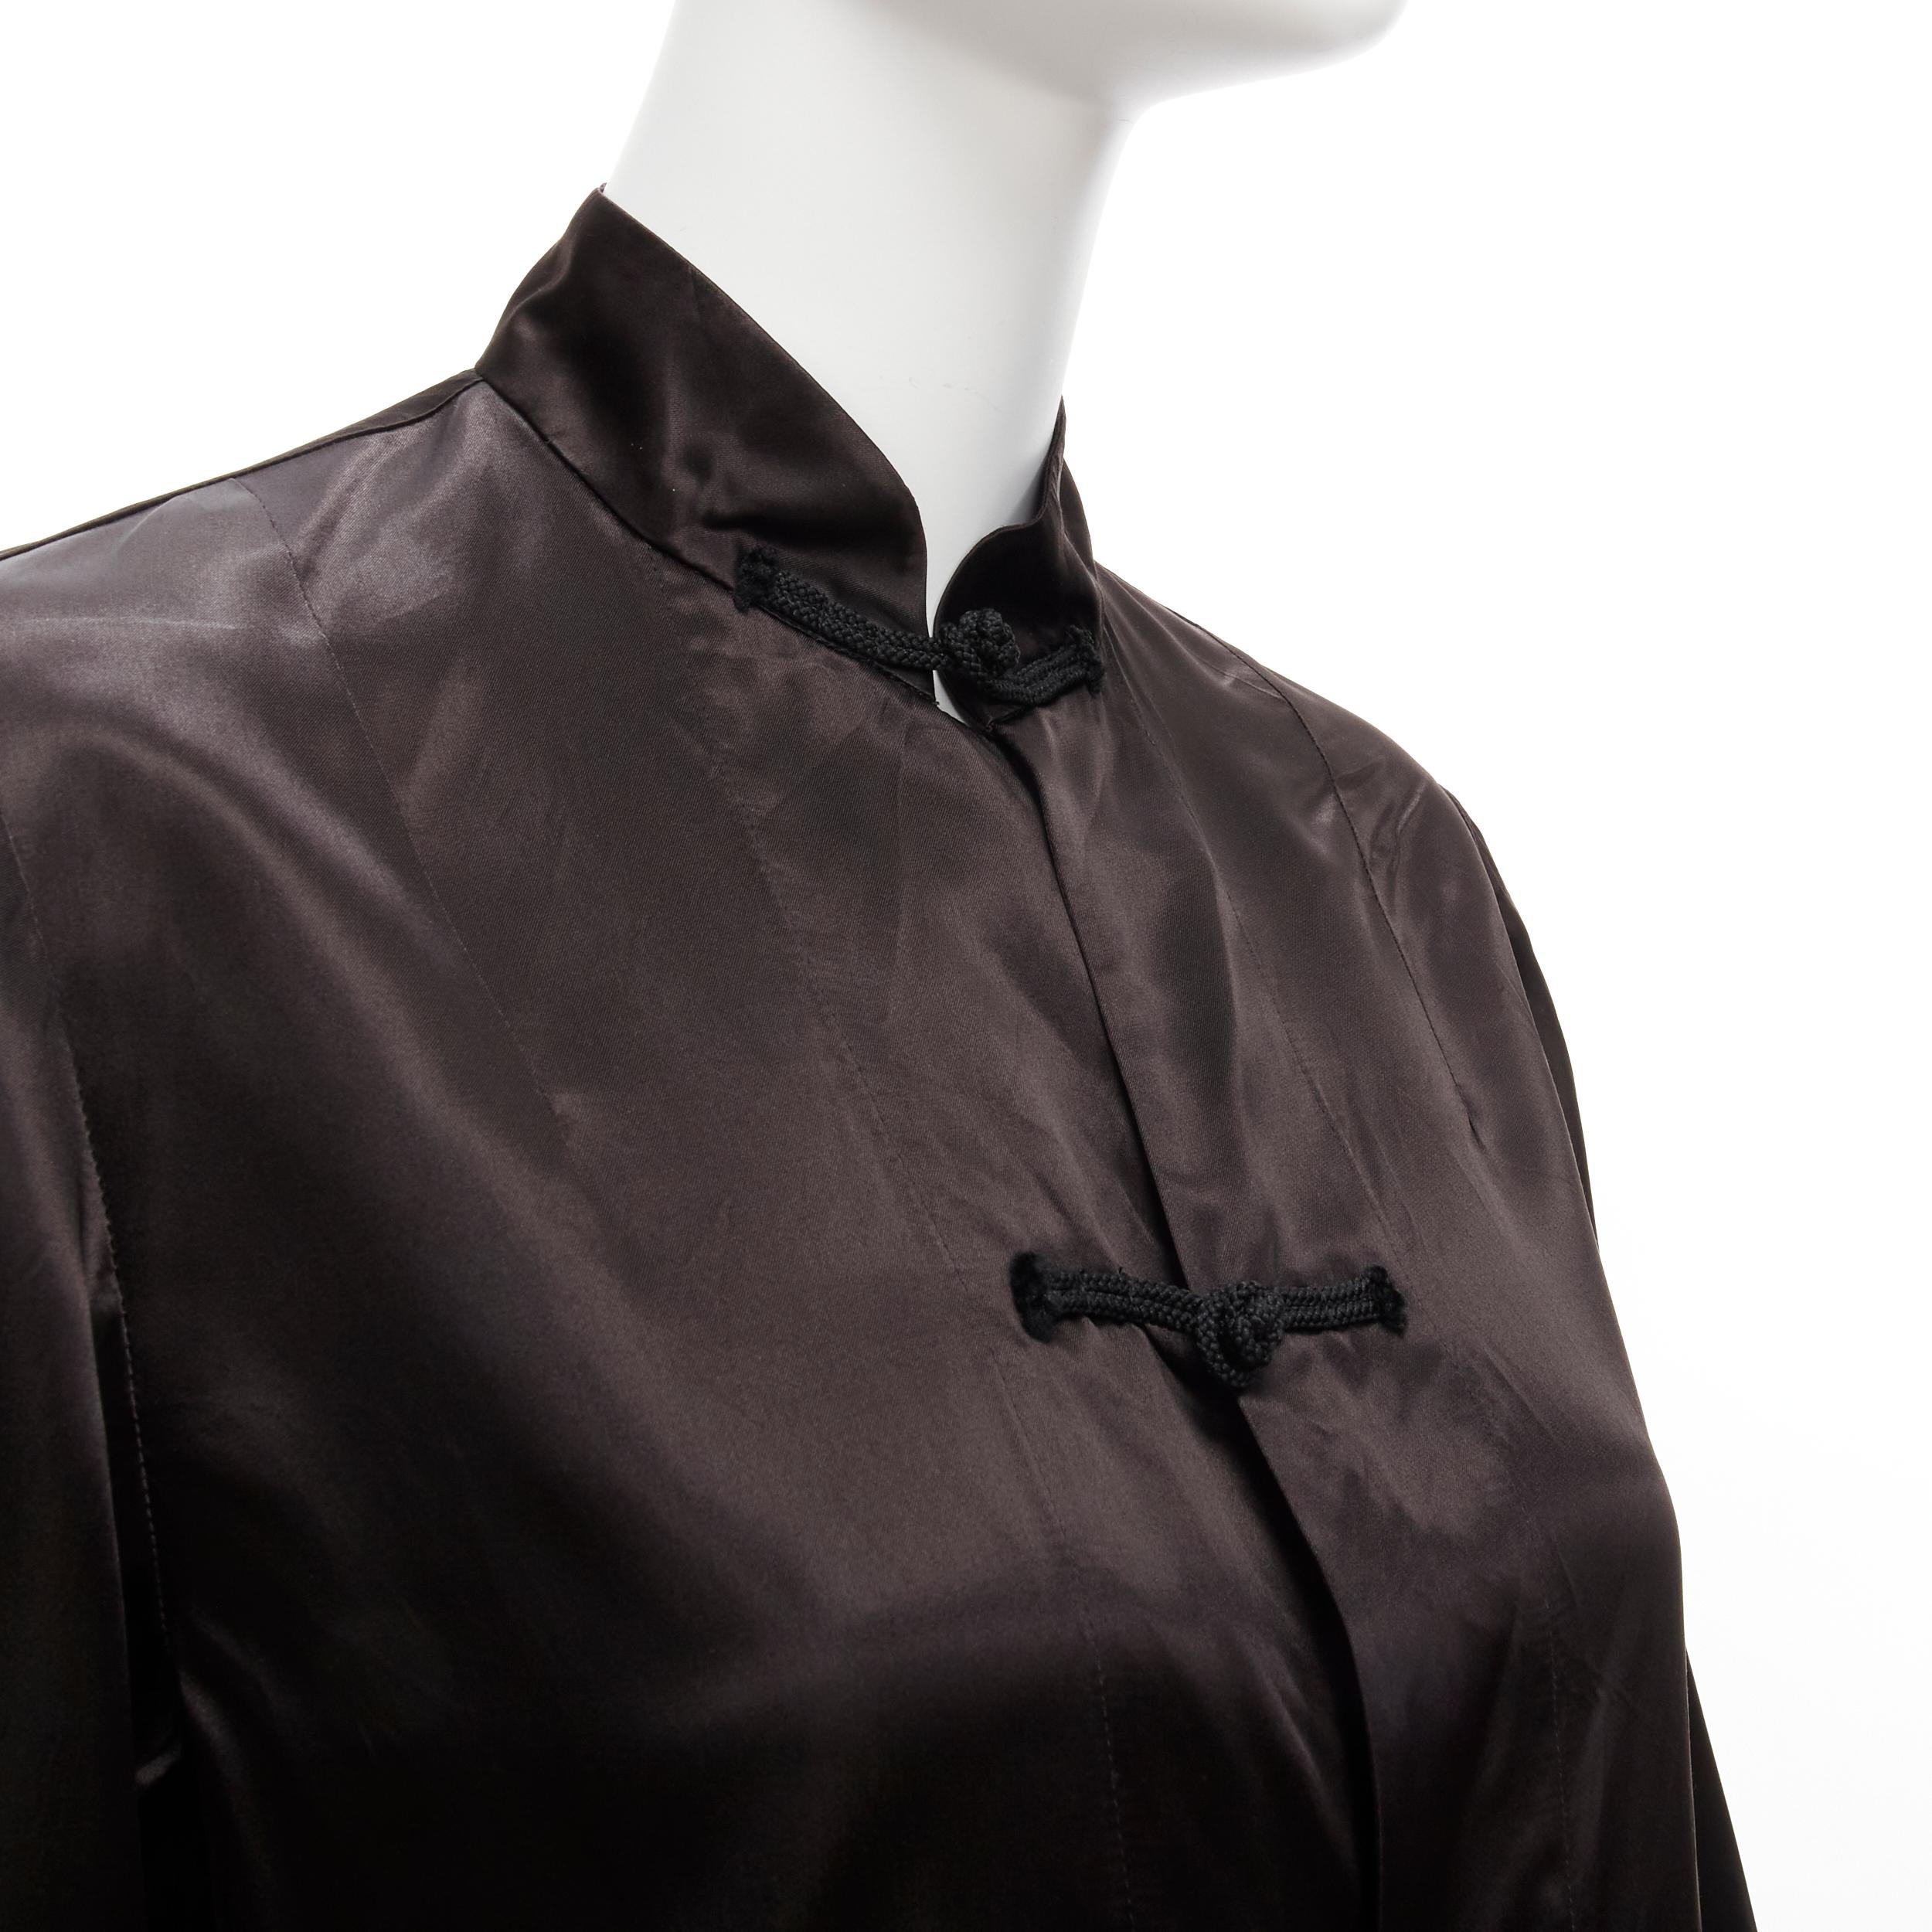 COMME DES GARCONS BLACK Chinese butterfly knot buttons satin boxy qipao shirt S
Reference: LNKO/A02110
Brand: Comme Des Garcons
Designer: Rei Kawakubo
Collection: Black
Material: Acetate
Color: Black
Pattern: Solid
Closure: Button
Made in: